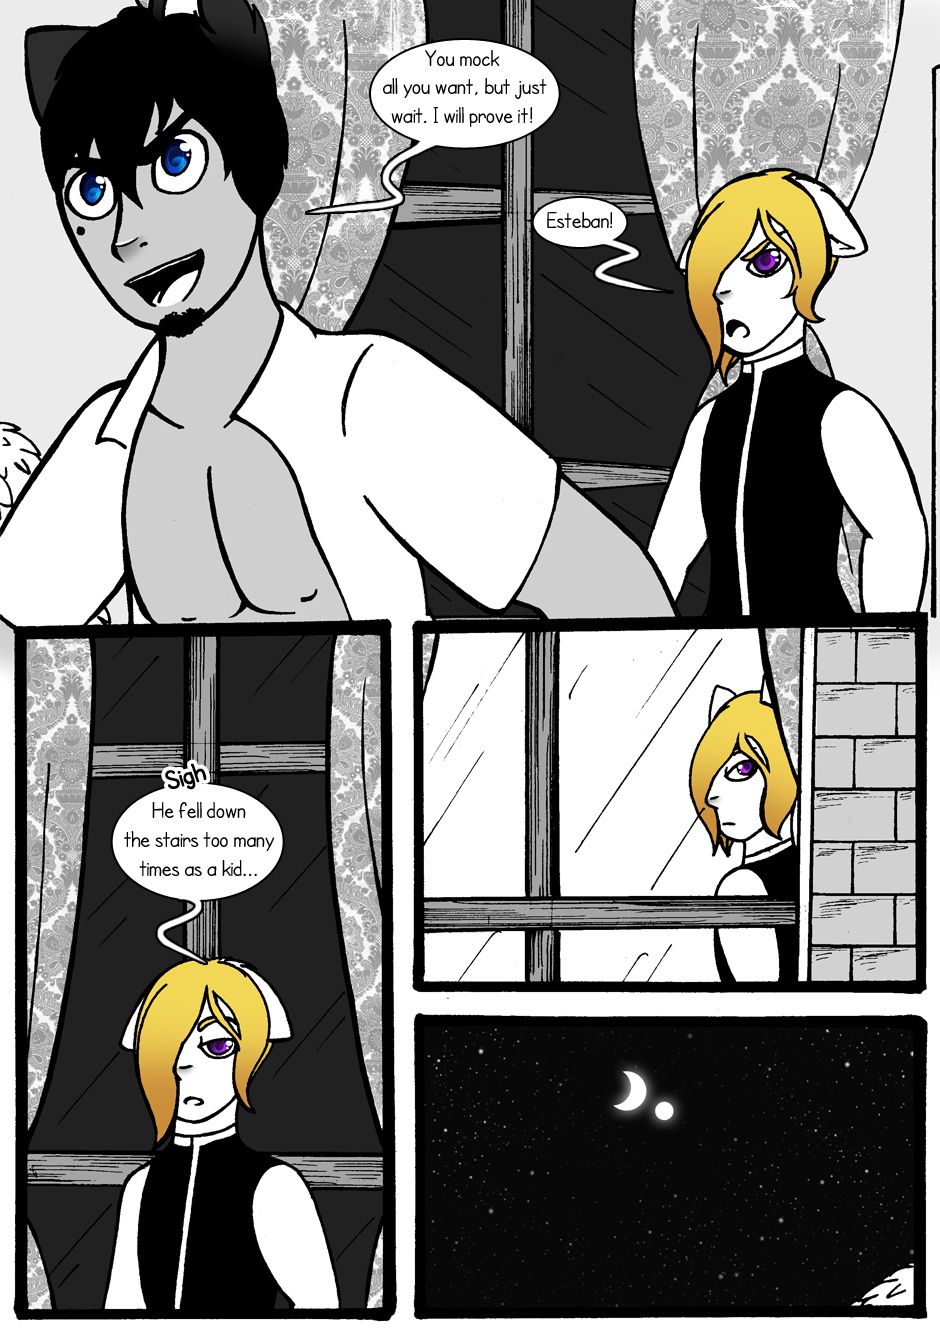 [Jeny-jen94] Between Kings and Queens [Ongoing] 65